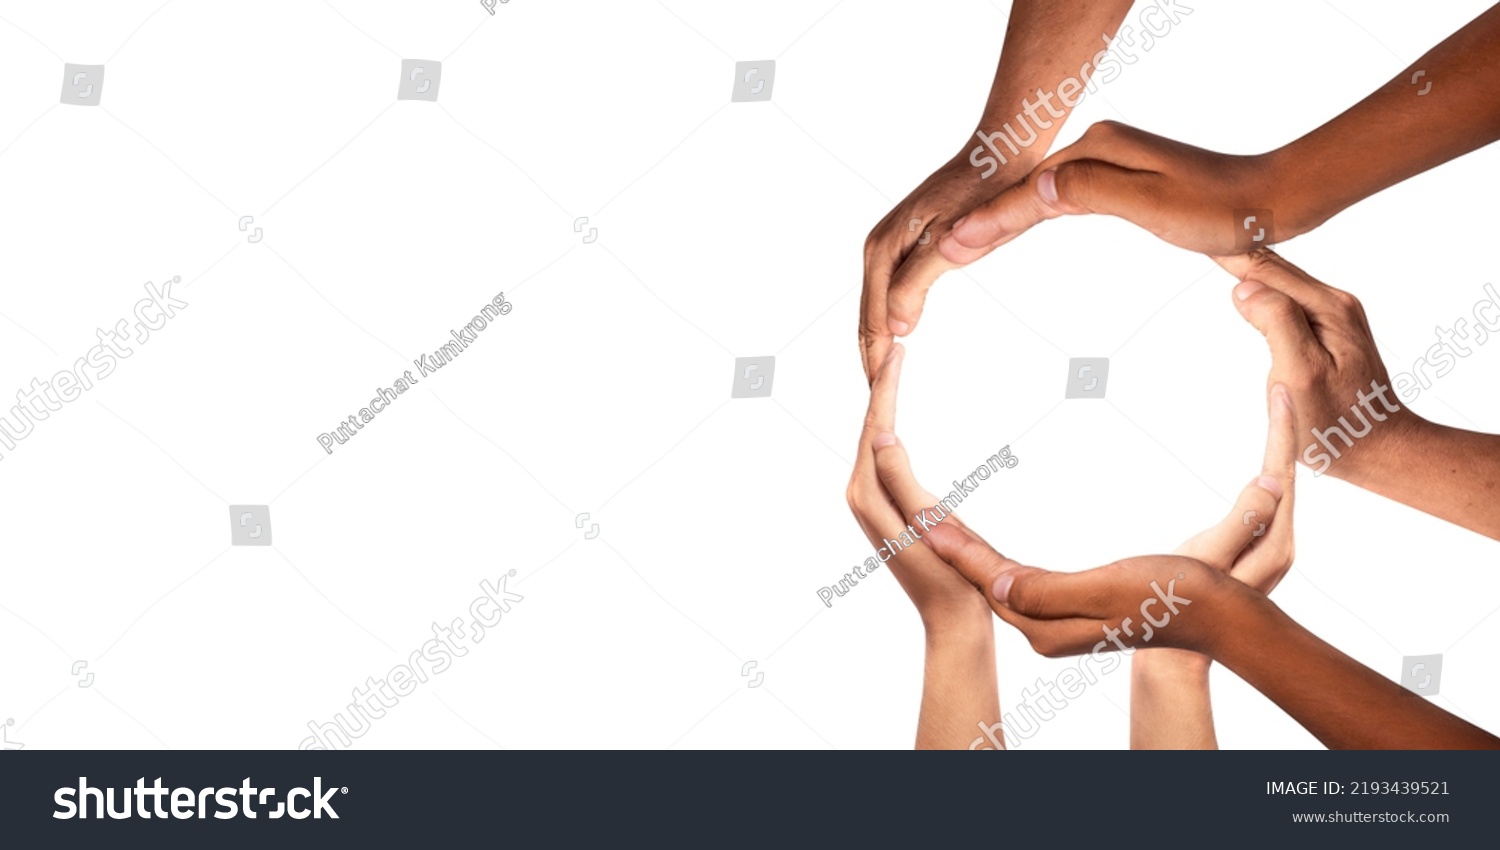 Symbol and shape of circle created from hands.The concept of unity, cooperation, partnership, teamwork and charity. diversity of a diverse group of people connected together as a supportive symbol. #2193439521